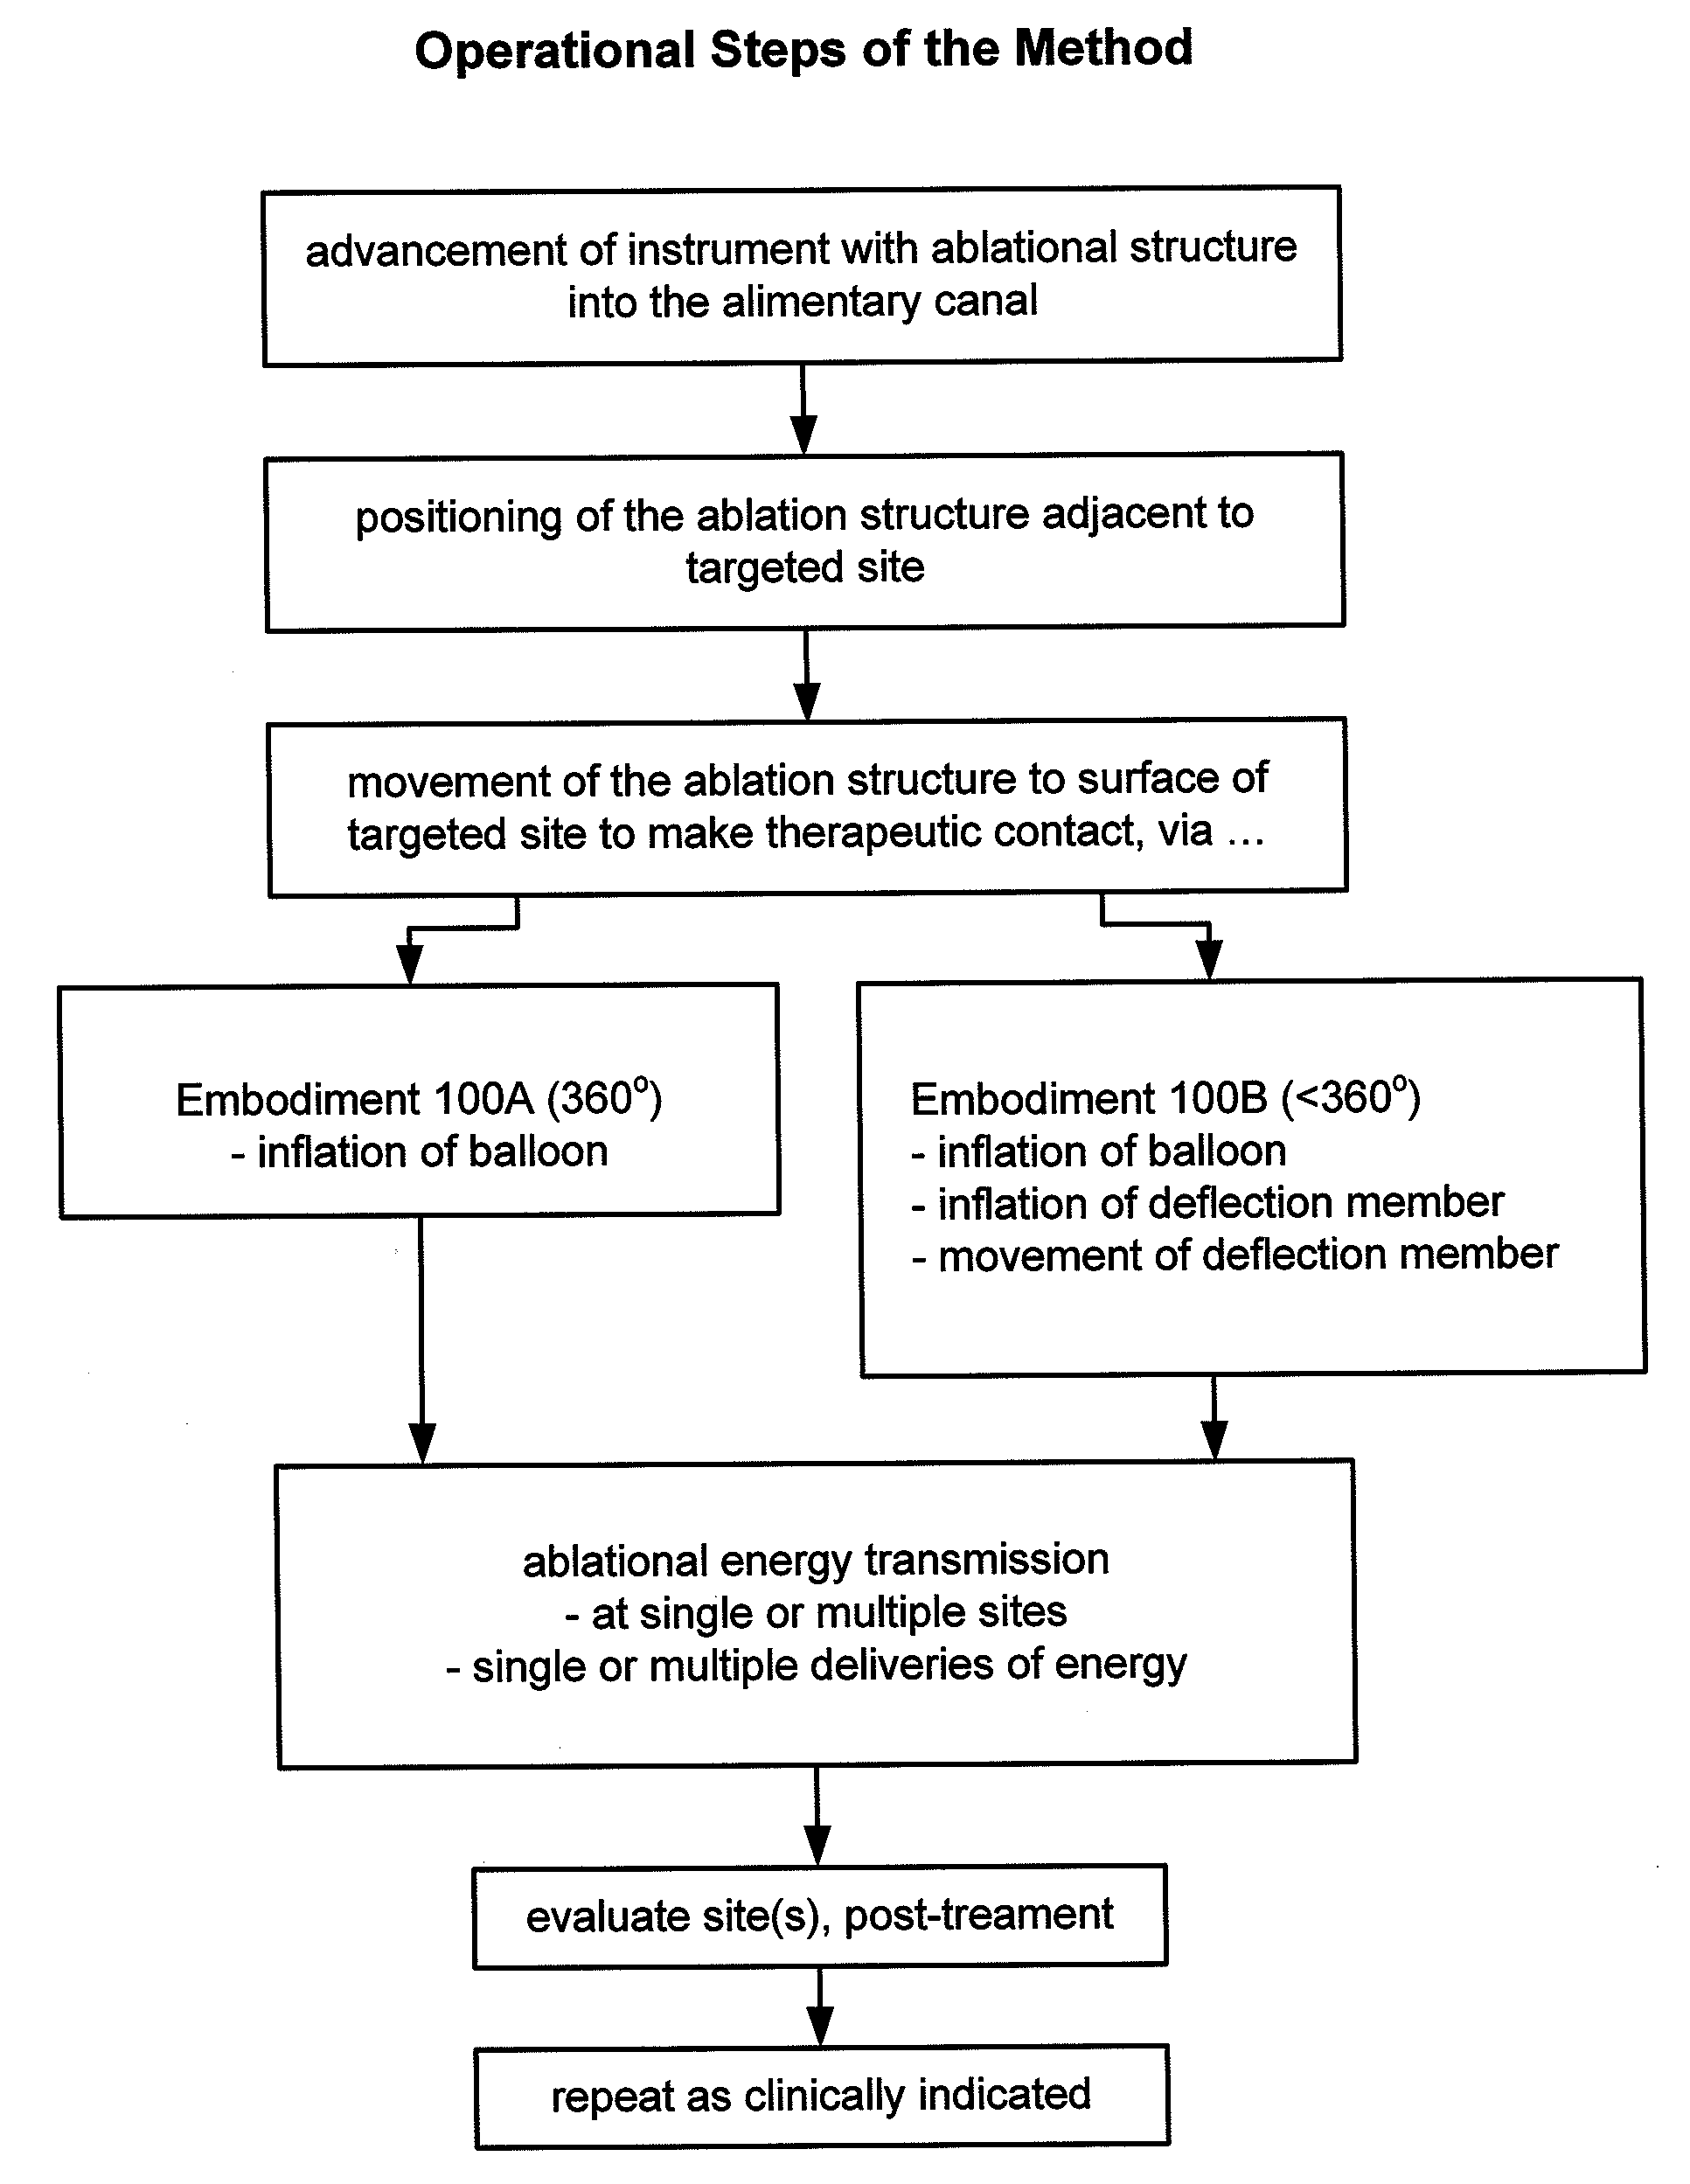 Method and Apparatus for Ablation of Benign, Pre-Cancerous and Early Cancerous Lesions That Originate Within the Epithelium and are Limited to the Mucosal Layer of the Gastrointestinal Tract